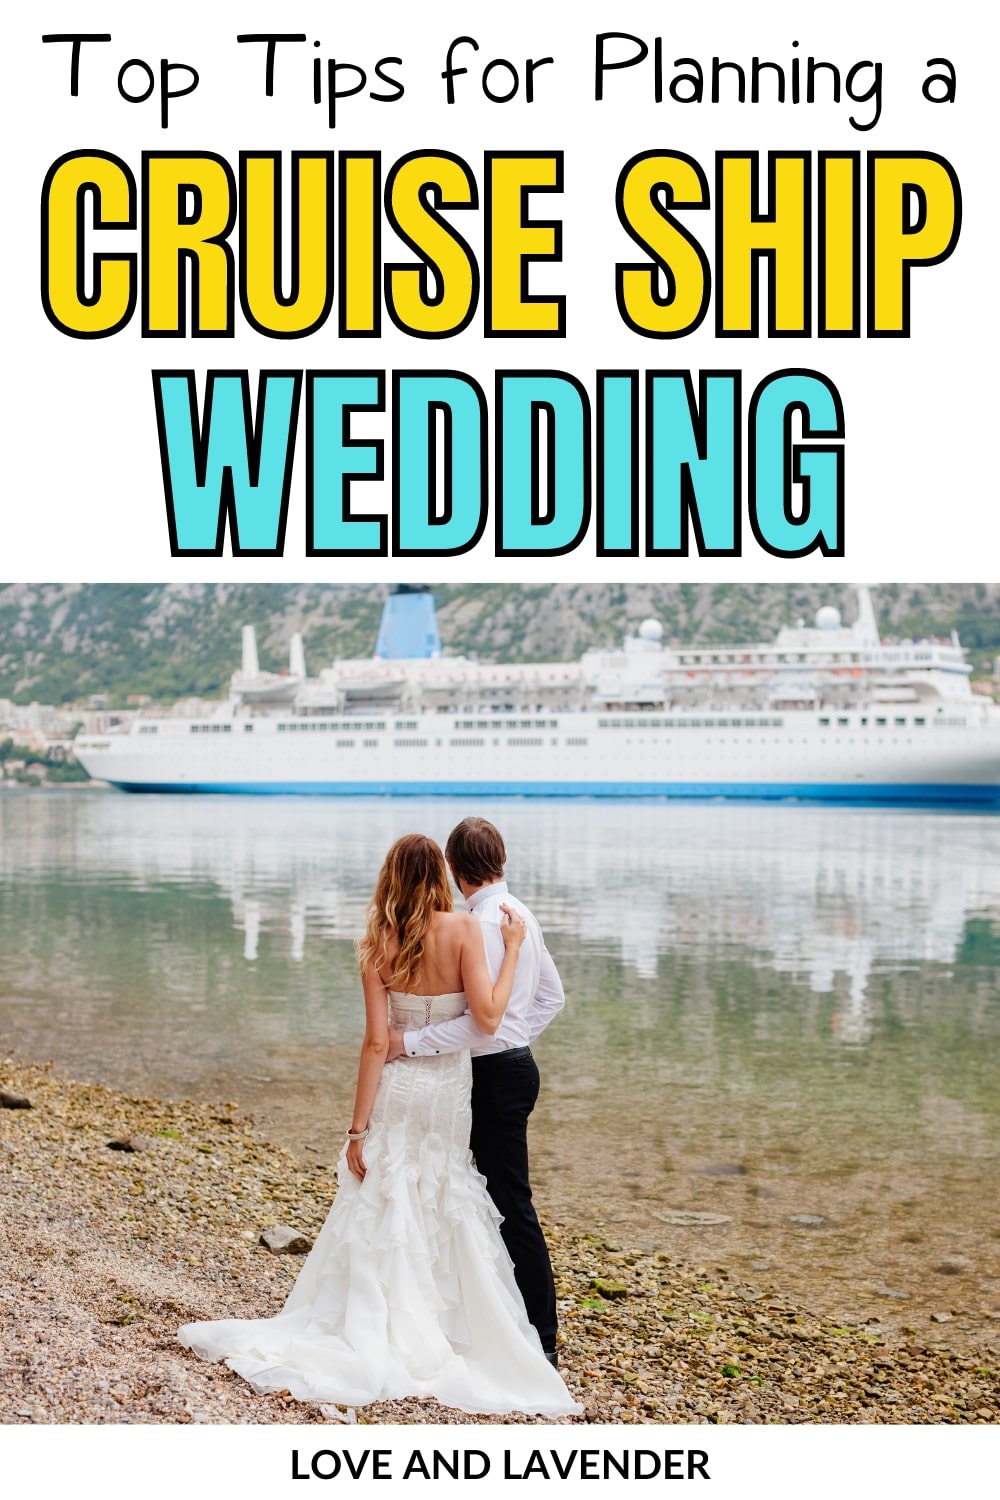 Top Tips for Planning a Cruise Ship Wedding